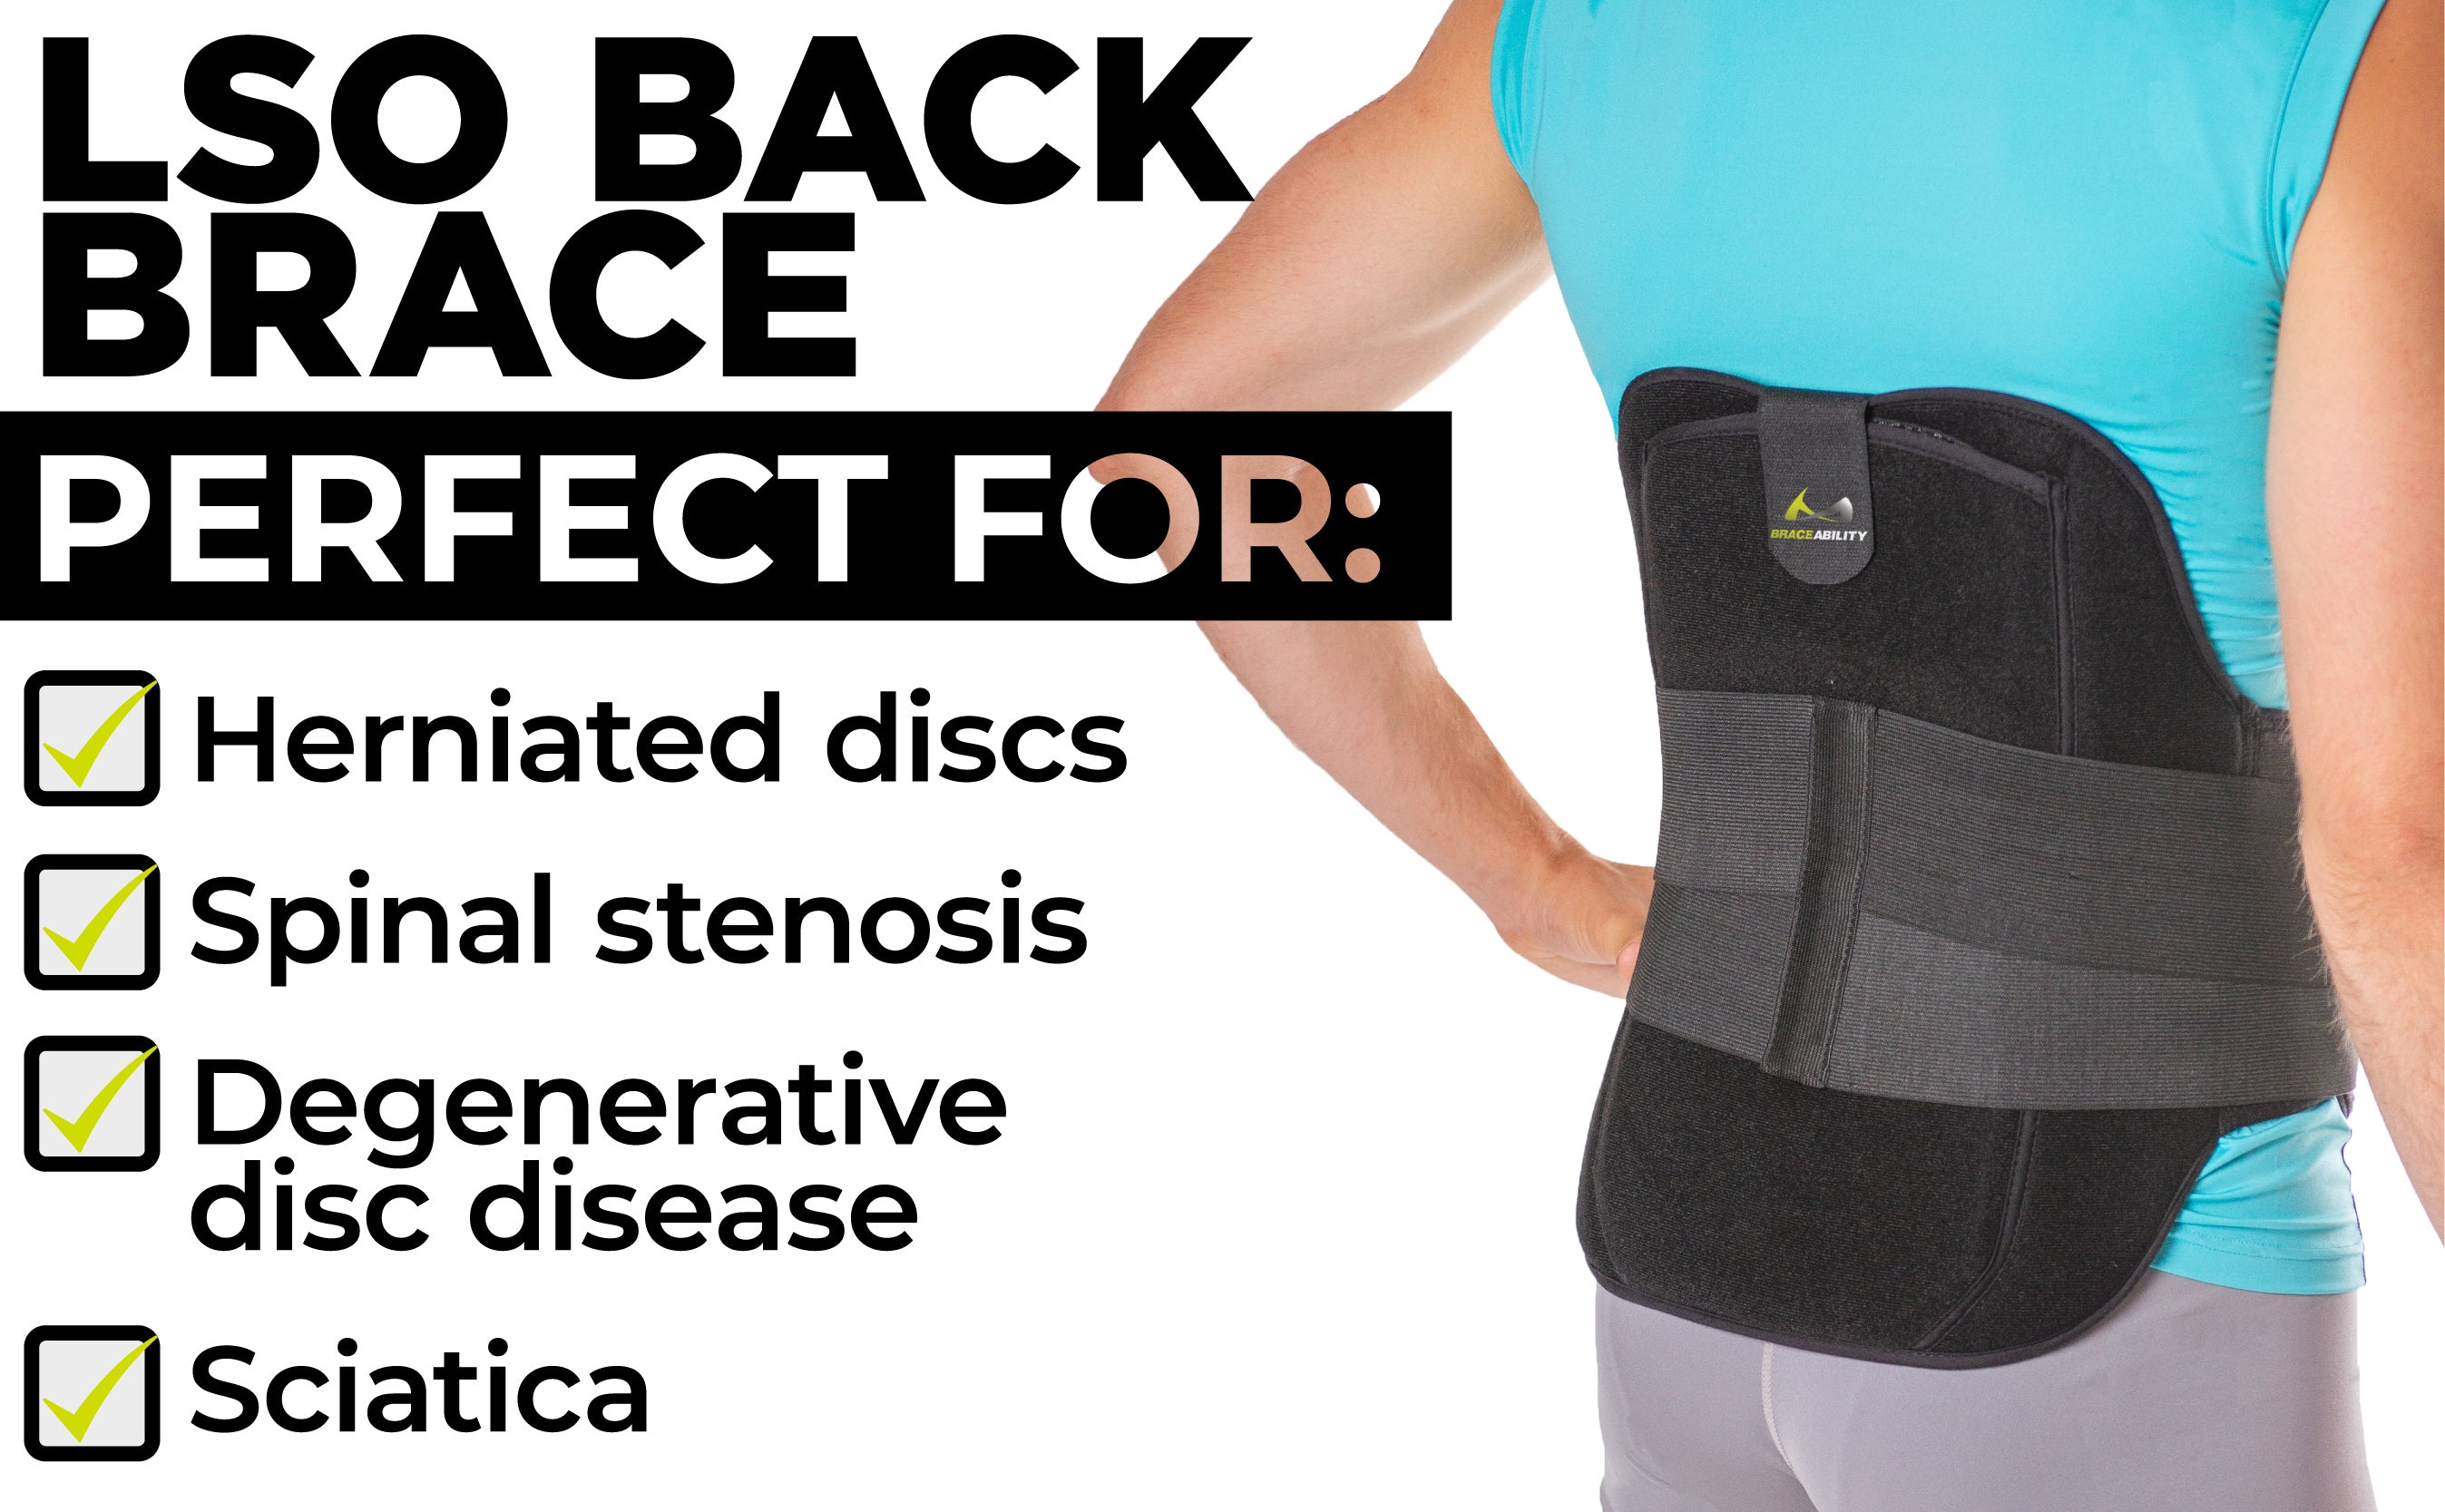 the braceability lso back brace is perfect for herniated discs, spinal stenosis, and sciatica